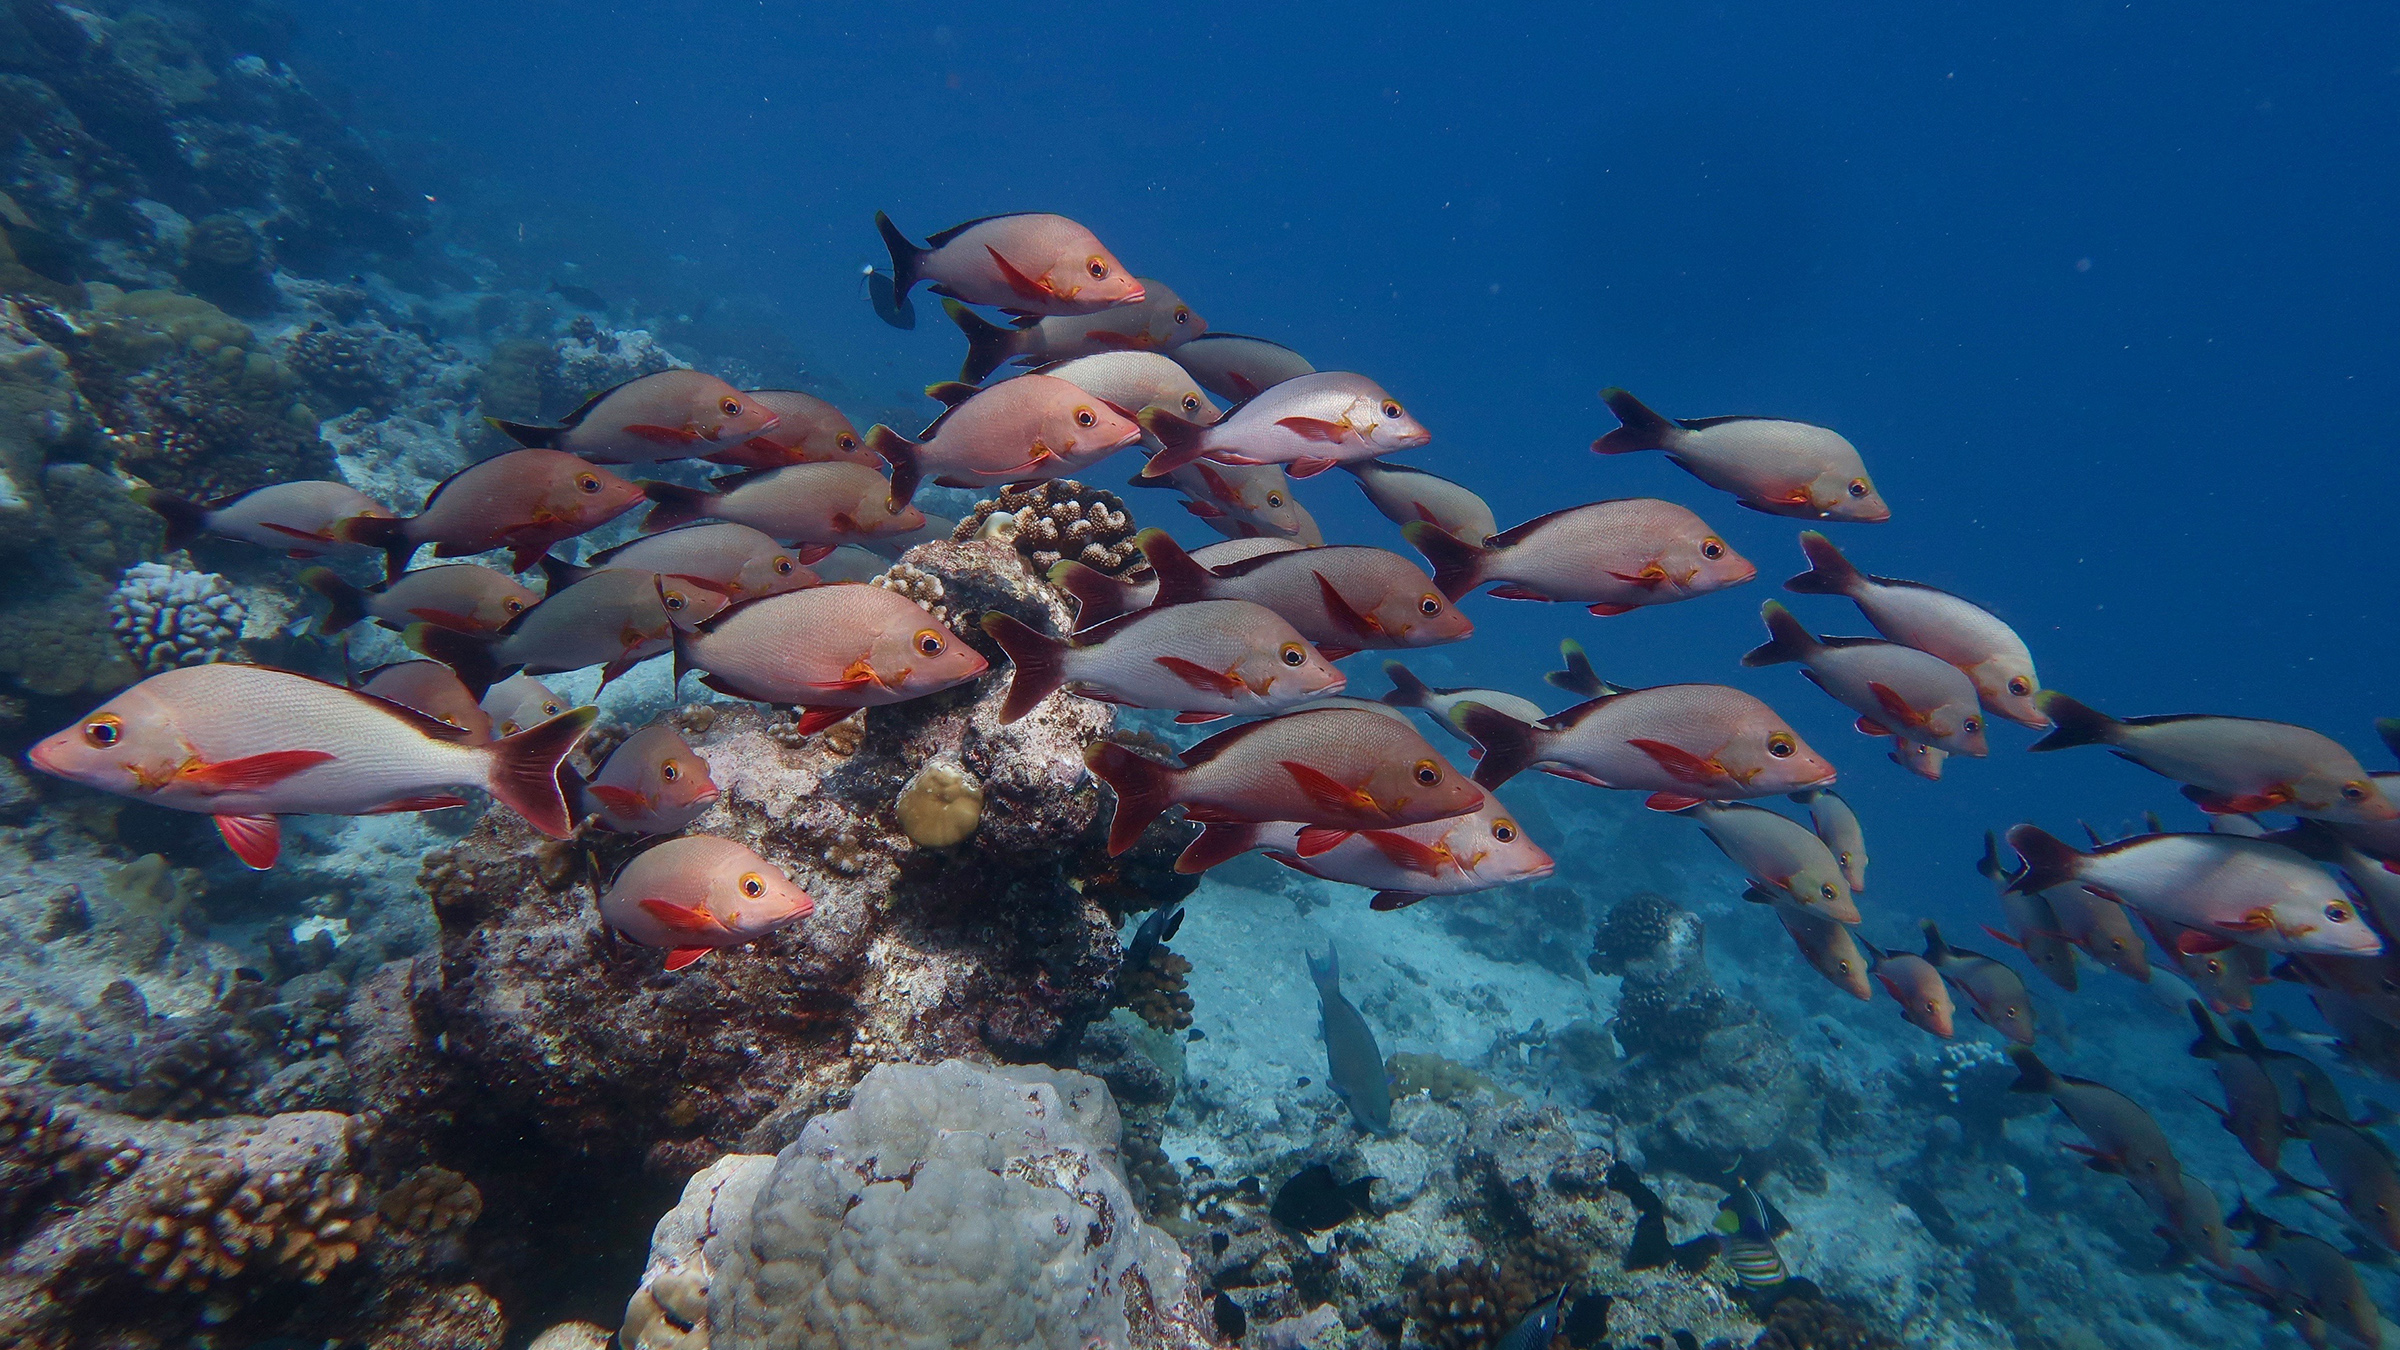 A school of colorful fish swim over a coral reef